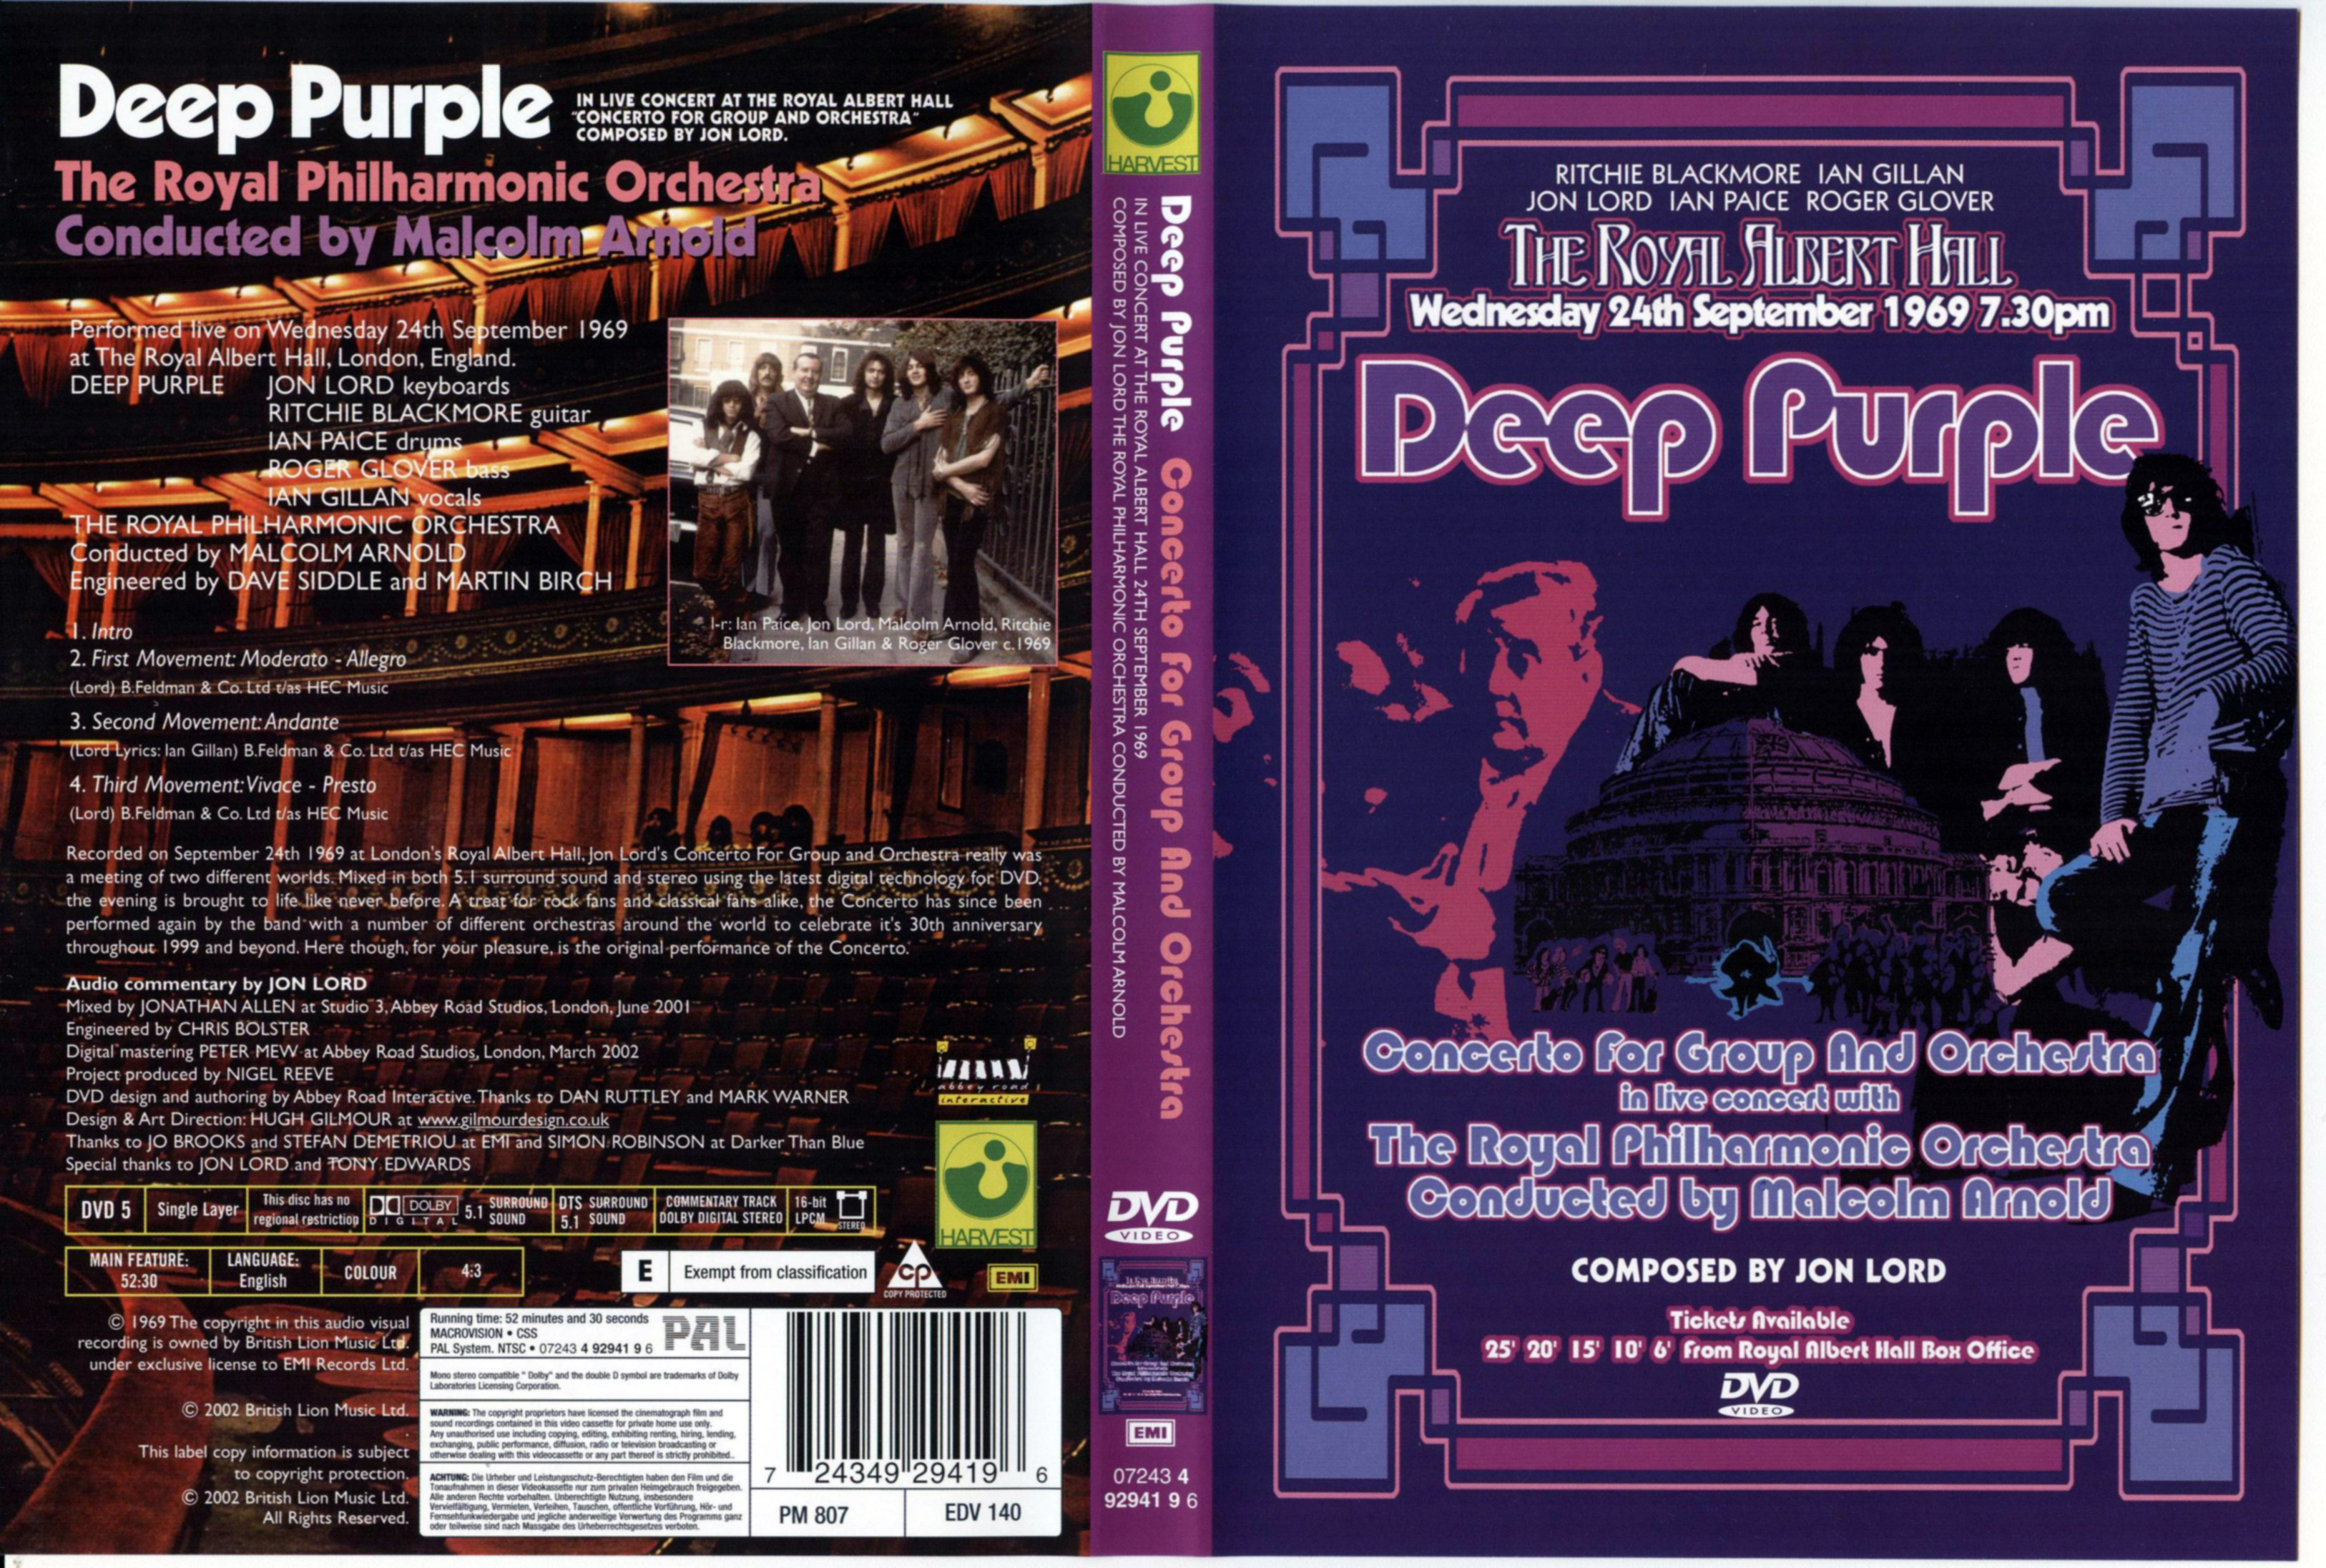 Jaquette DVD Deep purple and The Royal Philharmonic Orchestra 1969